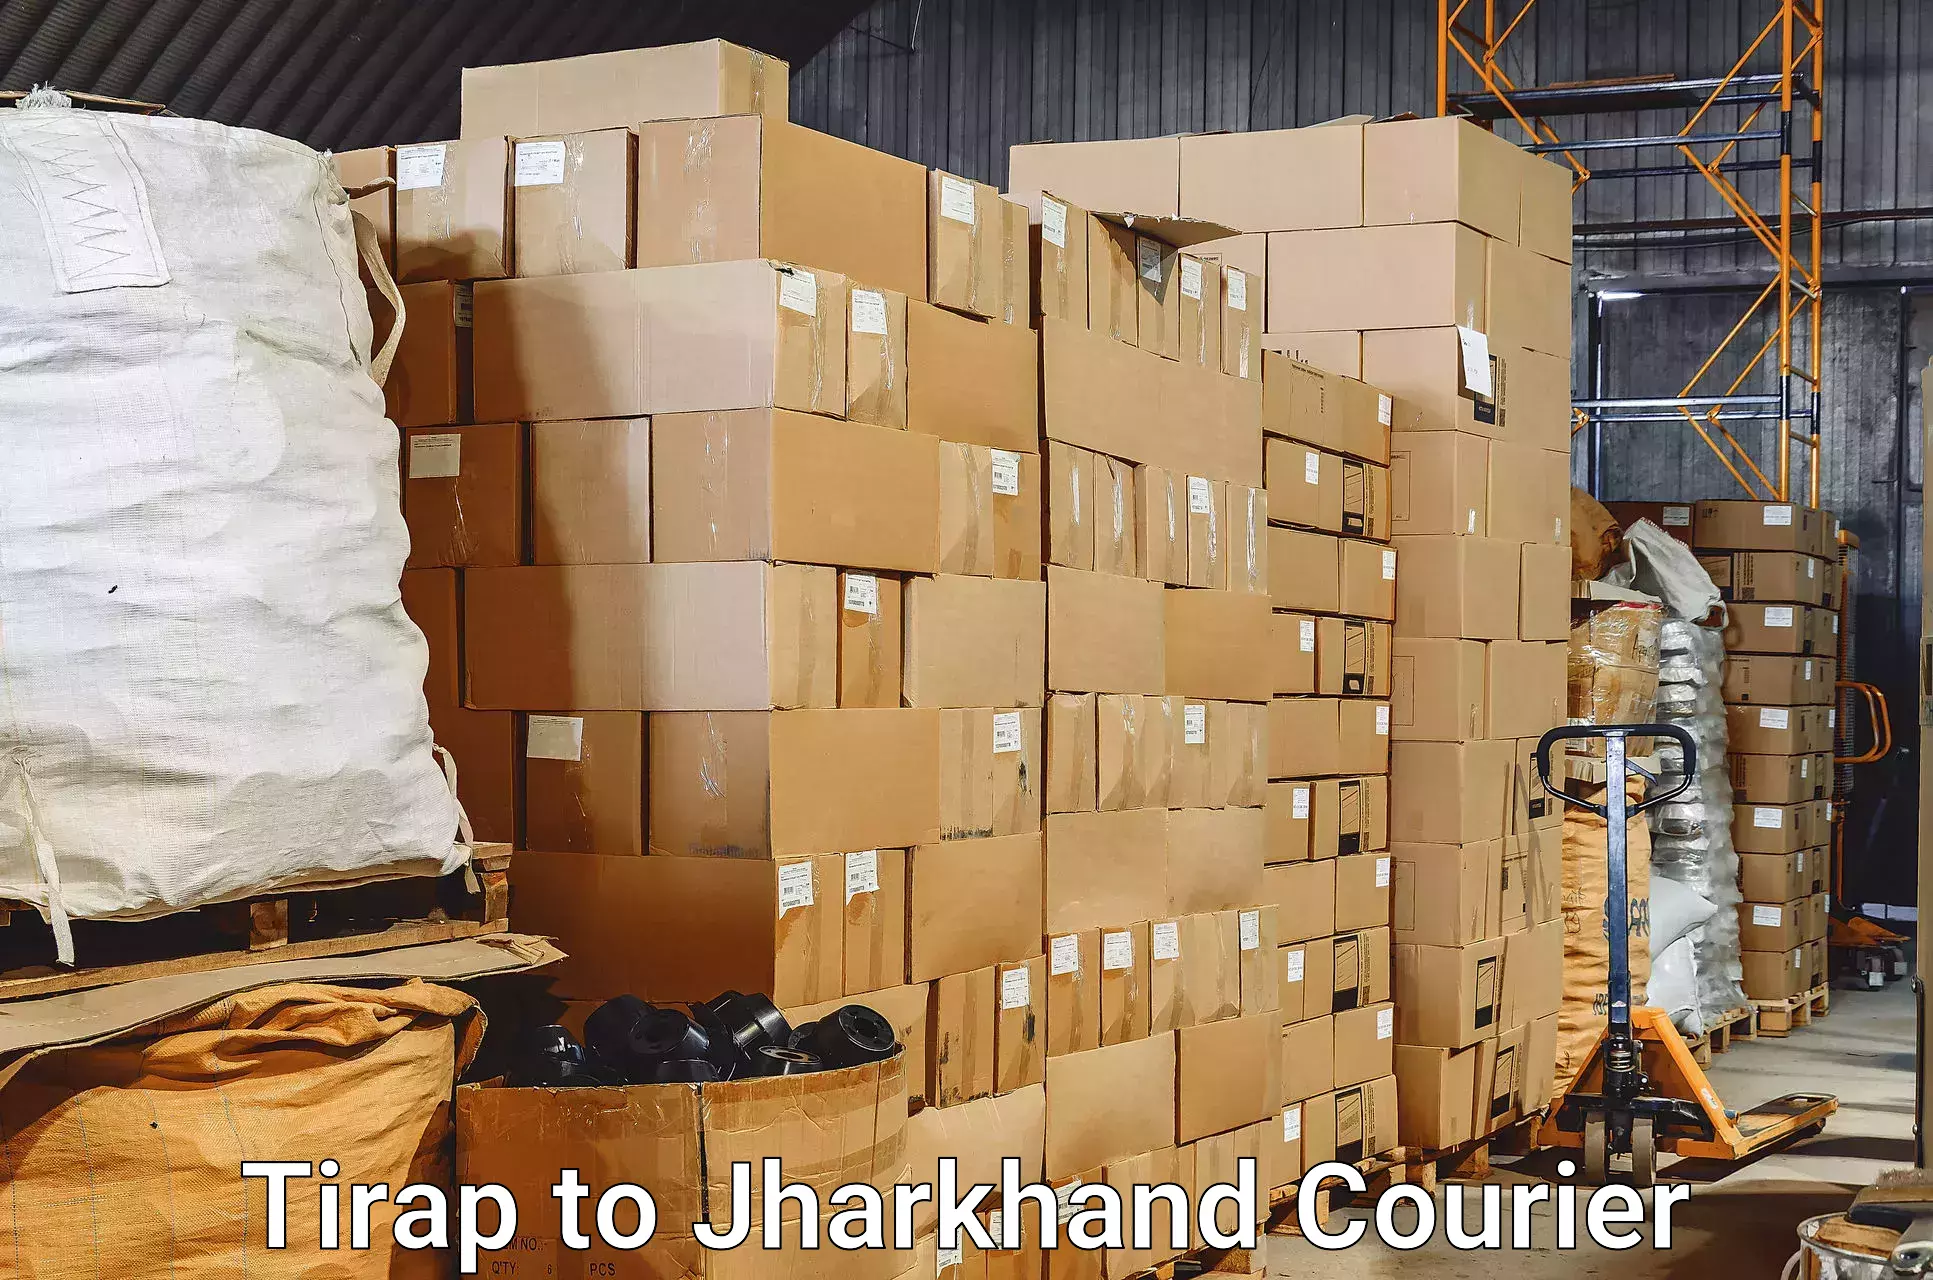 Efficient luggage delivery in Tirap to Jamshedpur